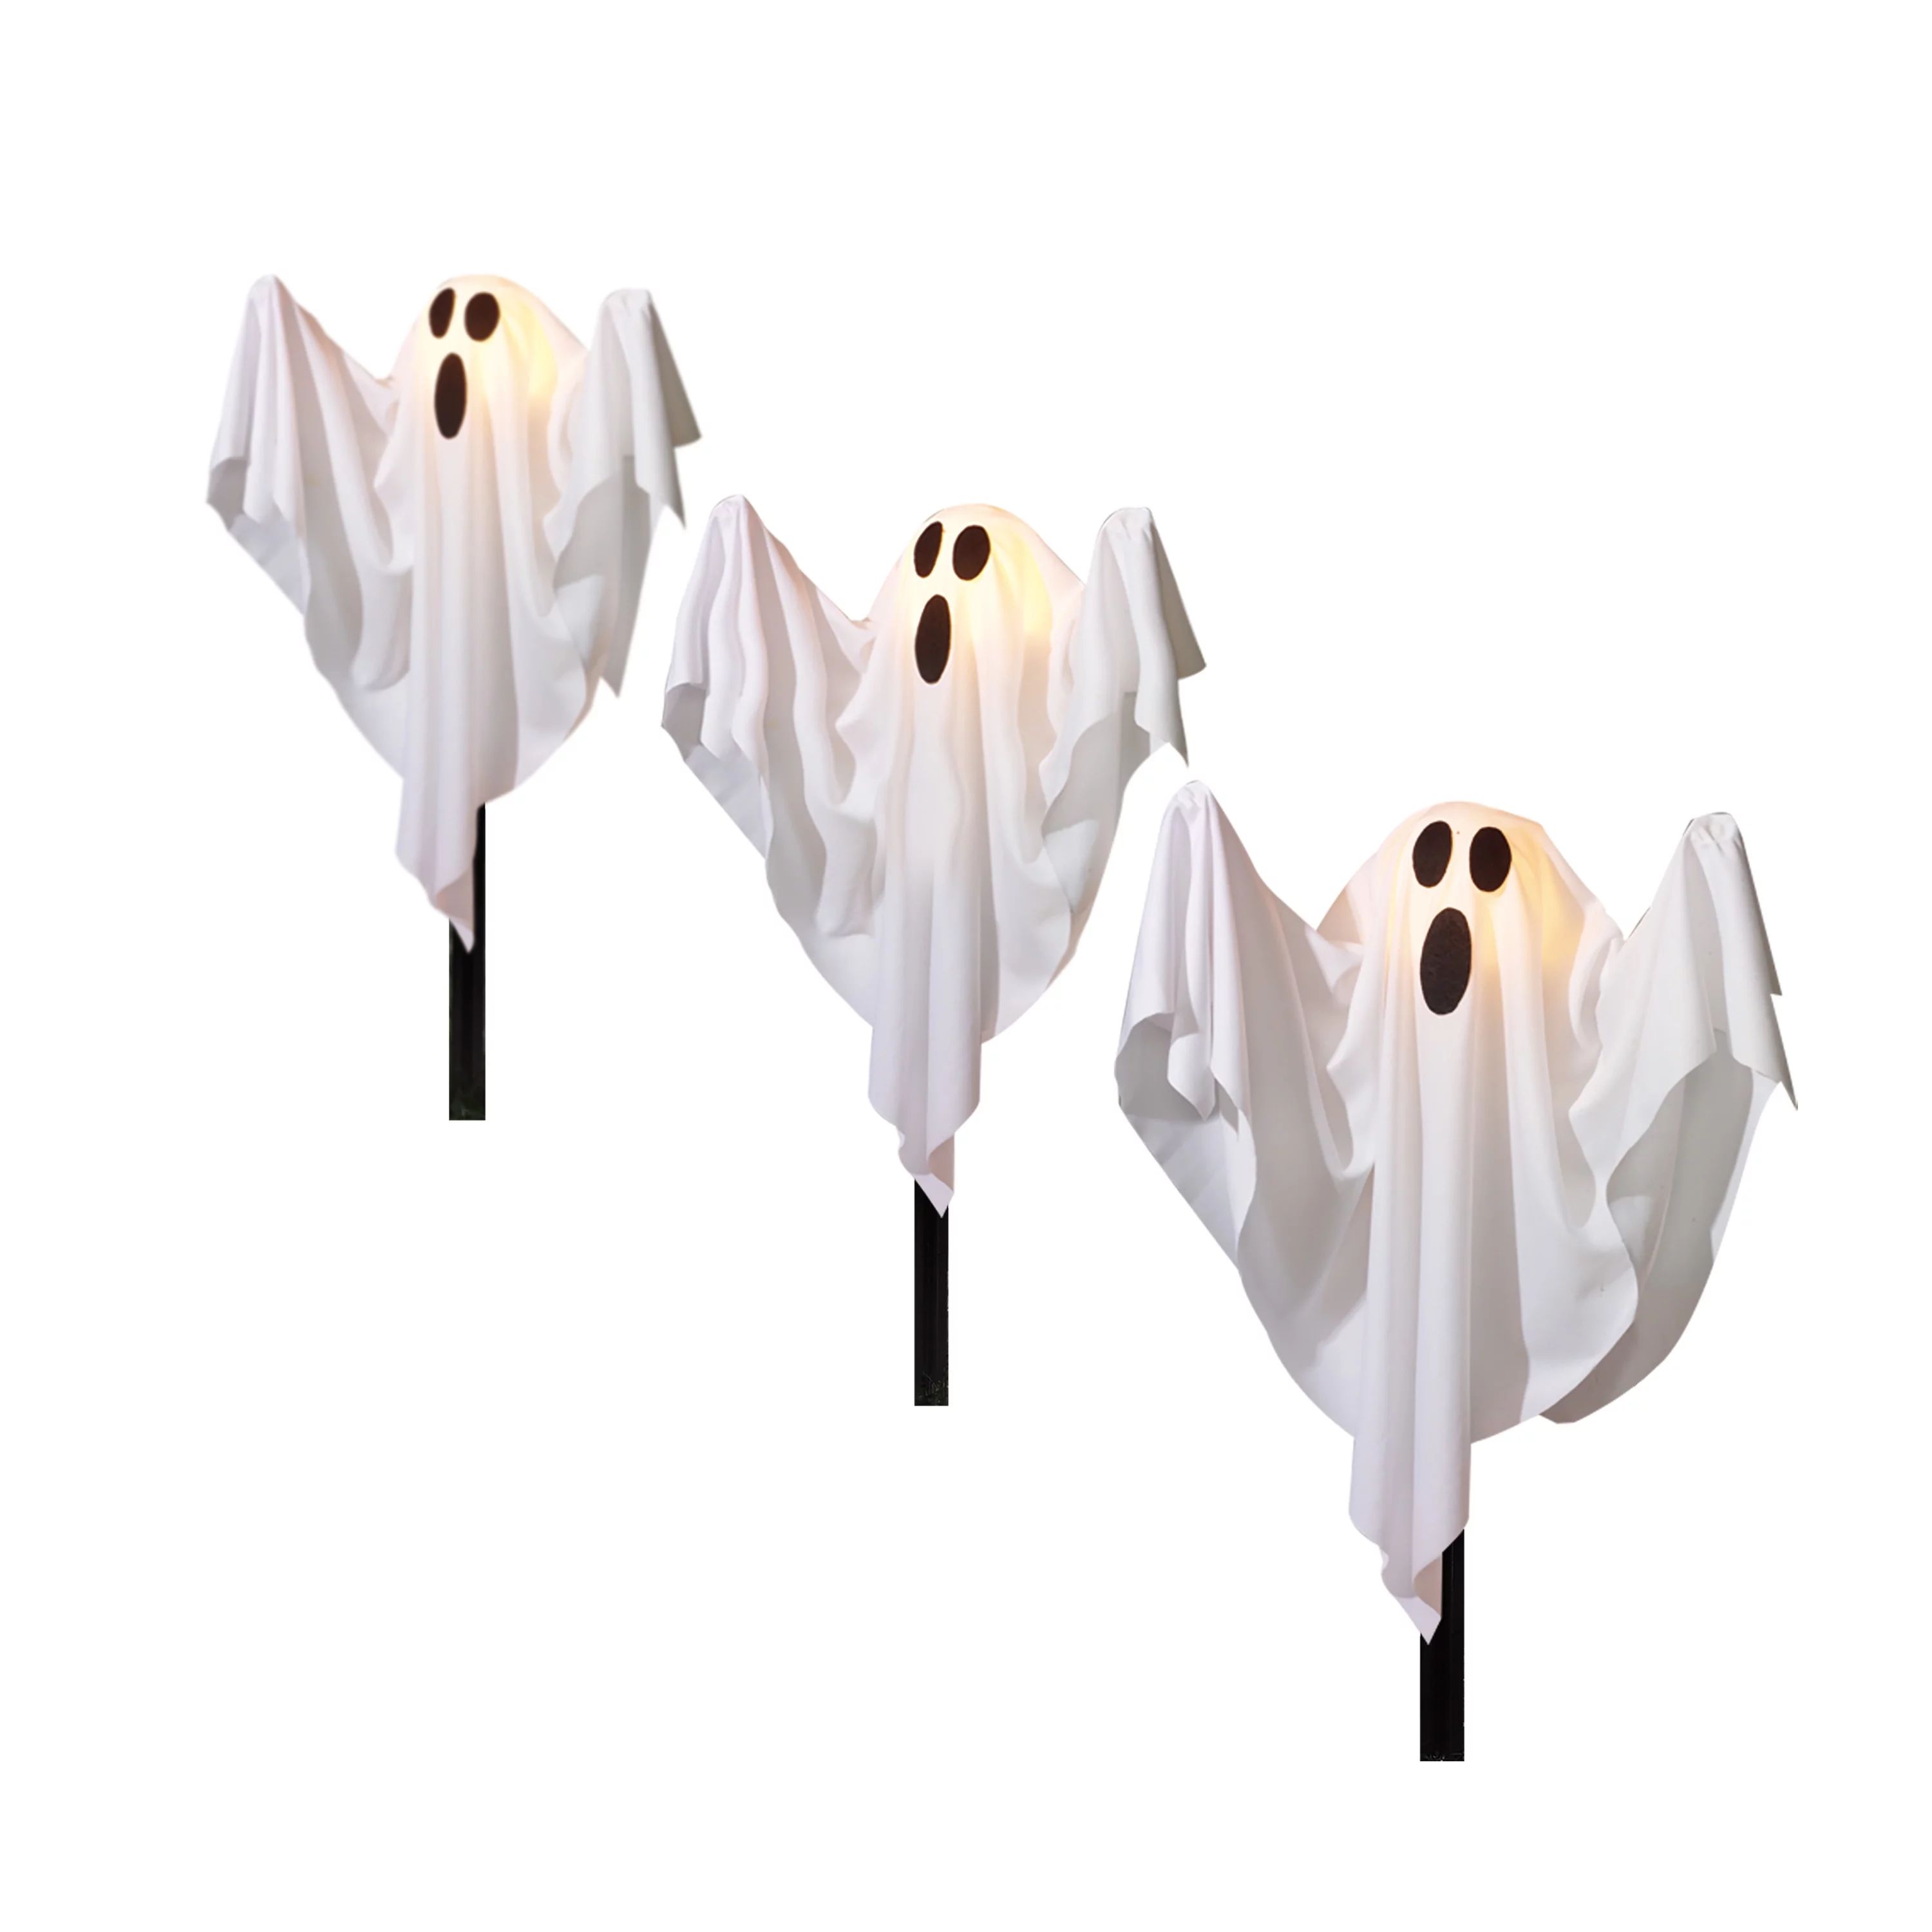 Way to Celebrate Halloween 3-Piece Outdoor Fabric Light-up Ghost Lawn Stakes, White | Walmart (US)